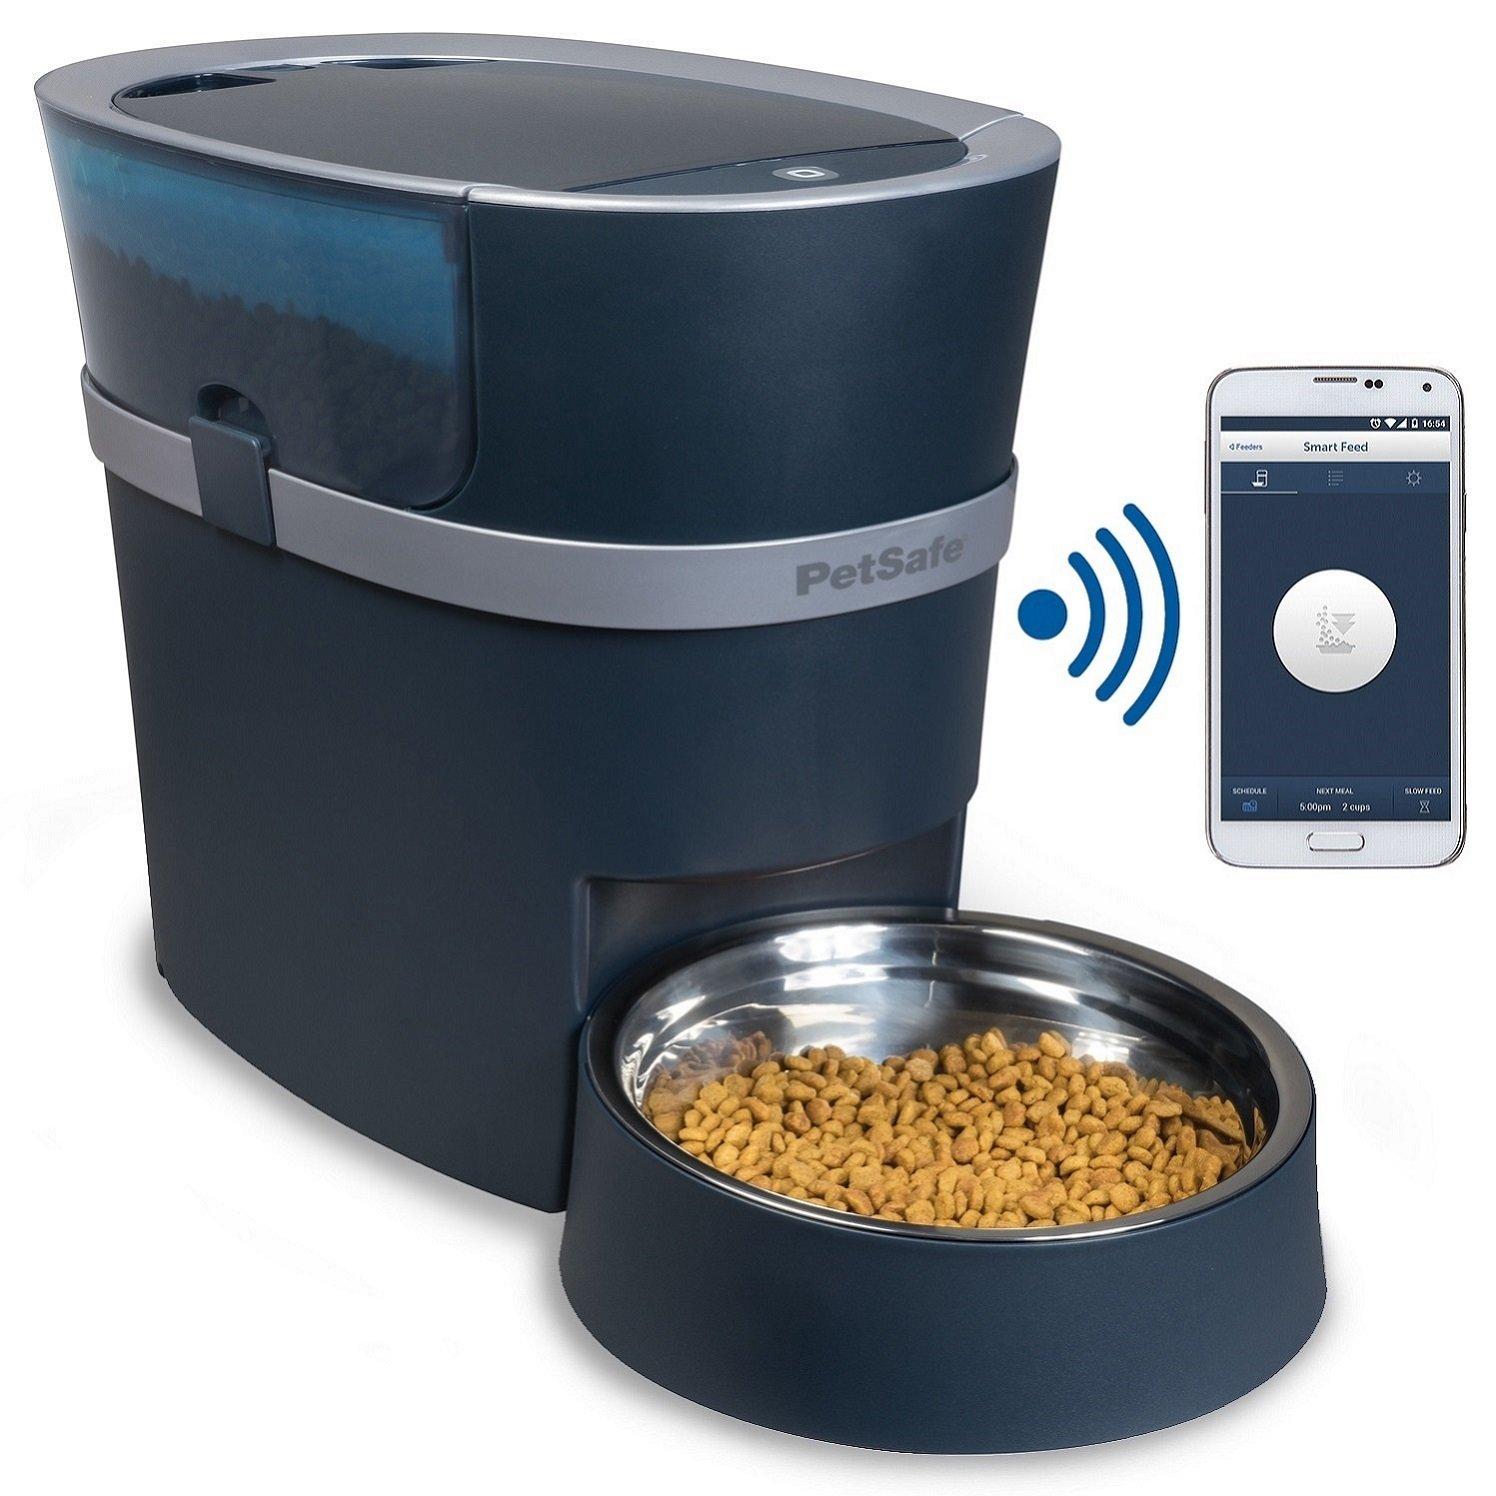 PetSafe Smart Feed Automatic Dog and Cat Feeder for iPhone and Android